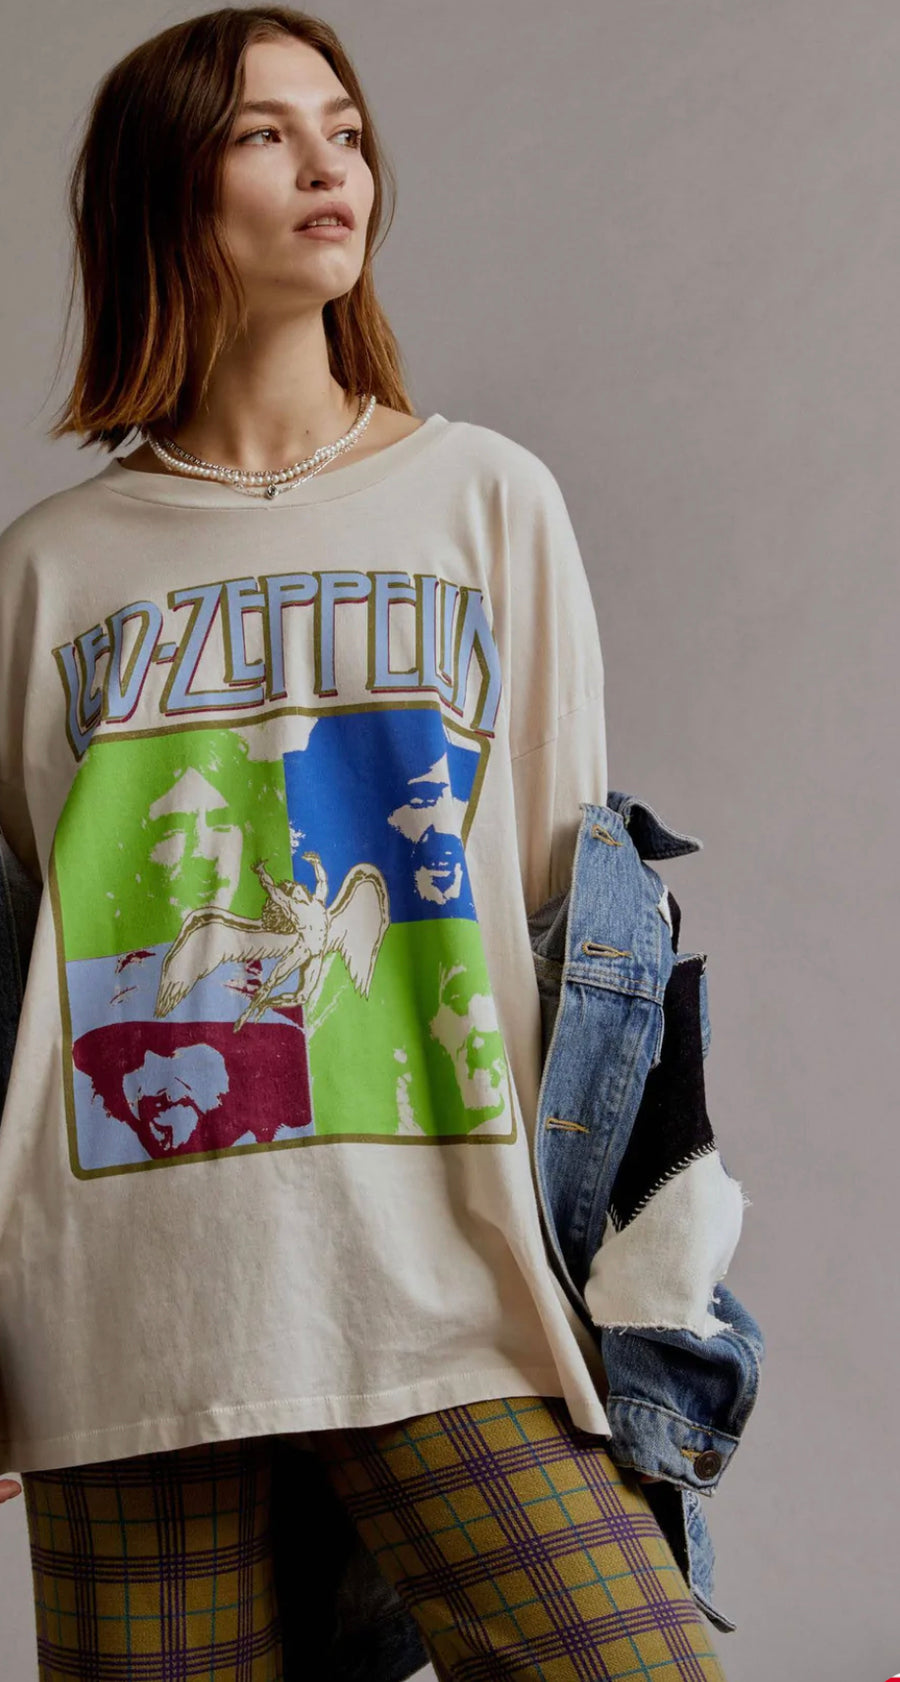 Daydreamer Led Zeppelin Four Square Merch Tee - Dirty White